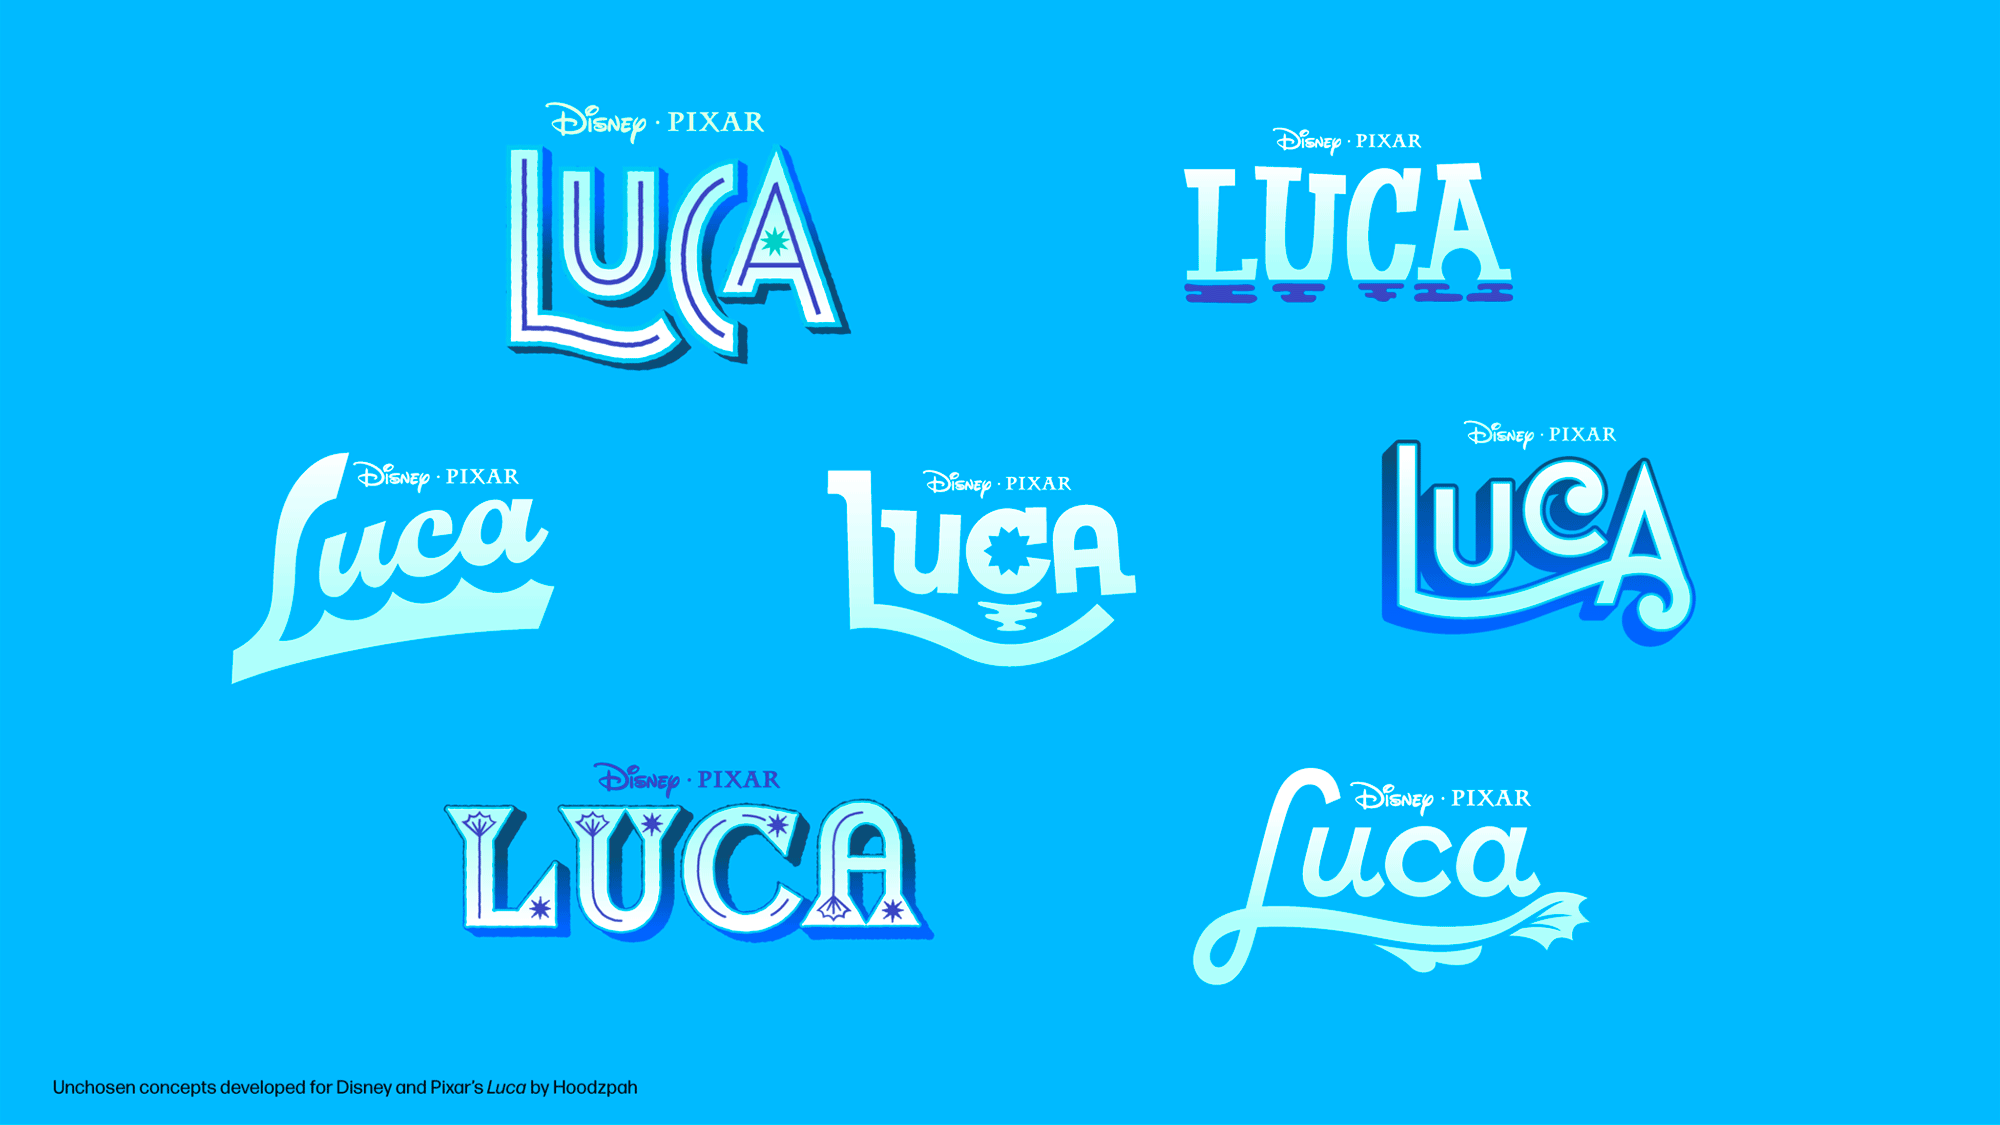 “Luca” Sketches